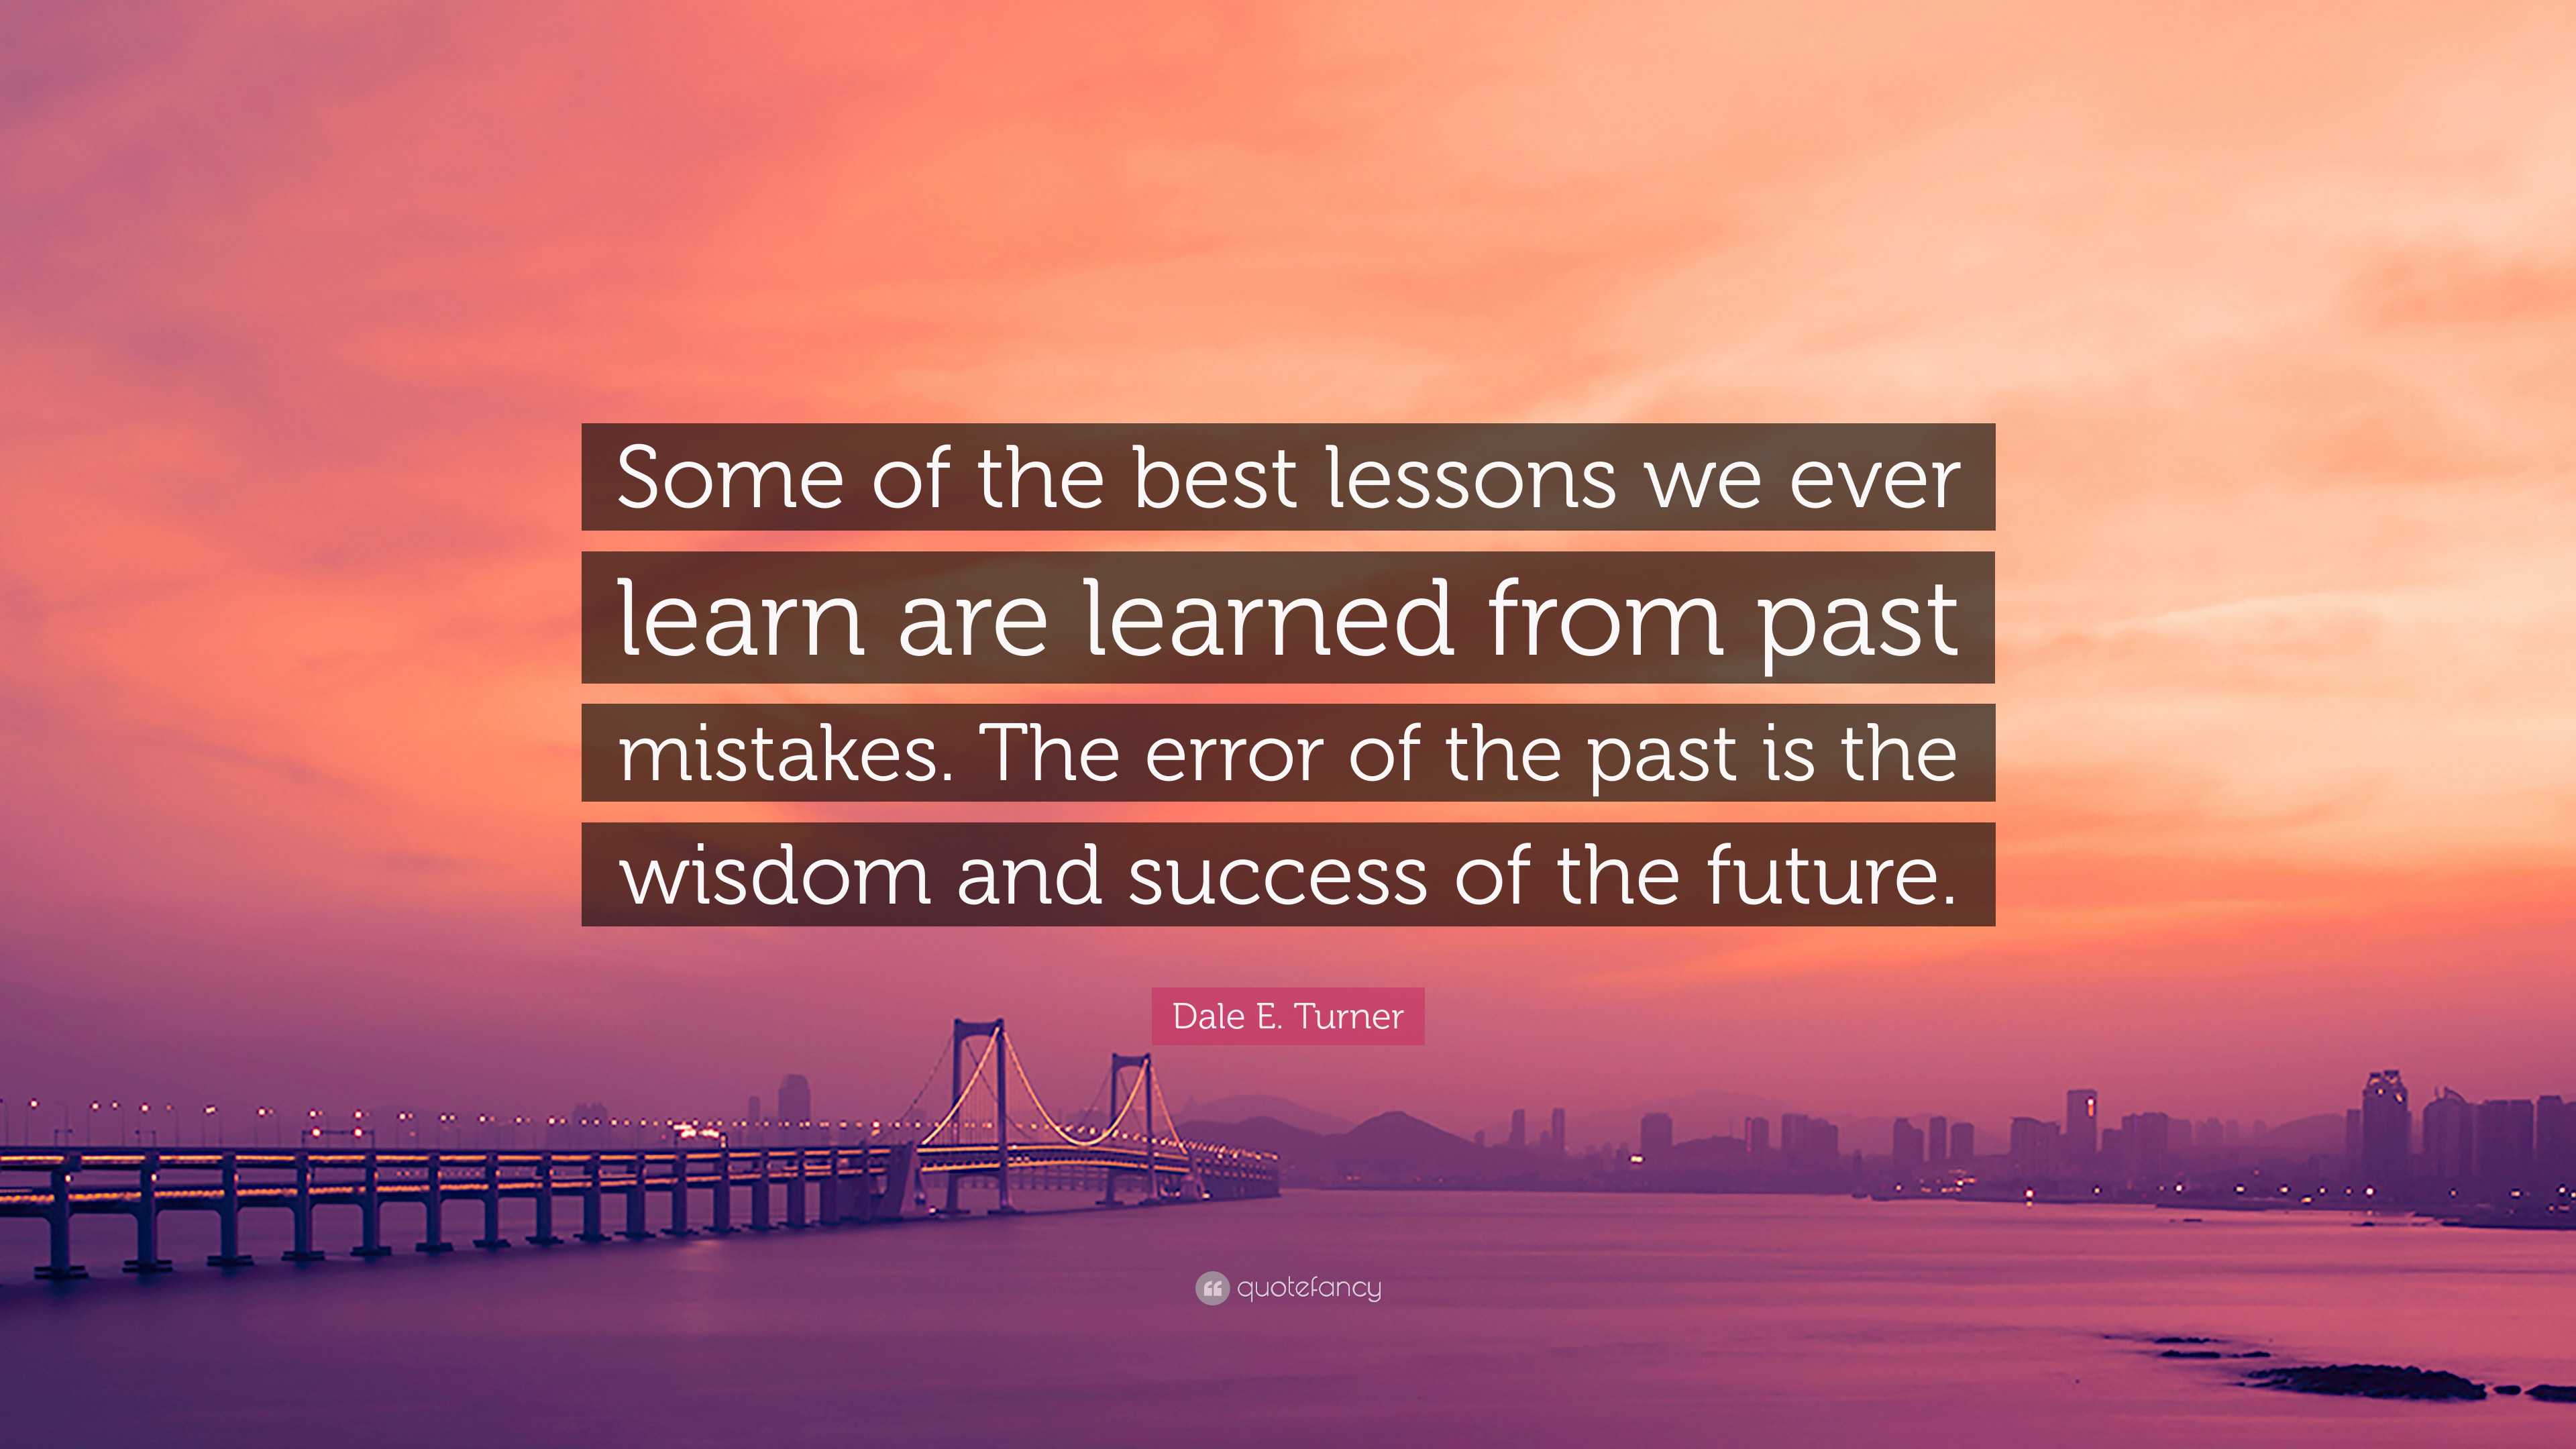 Learning lessons from the past